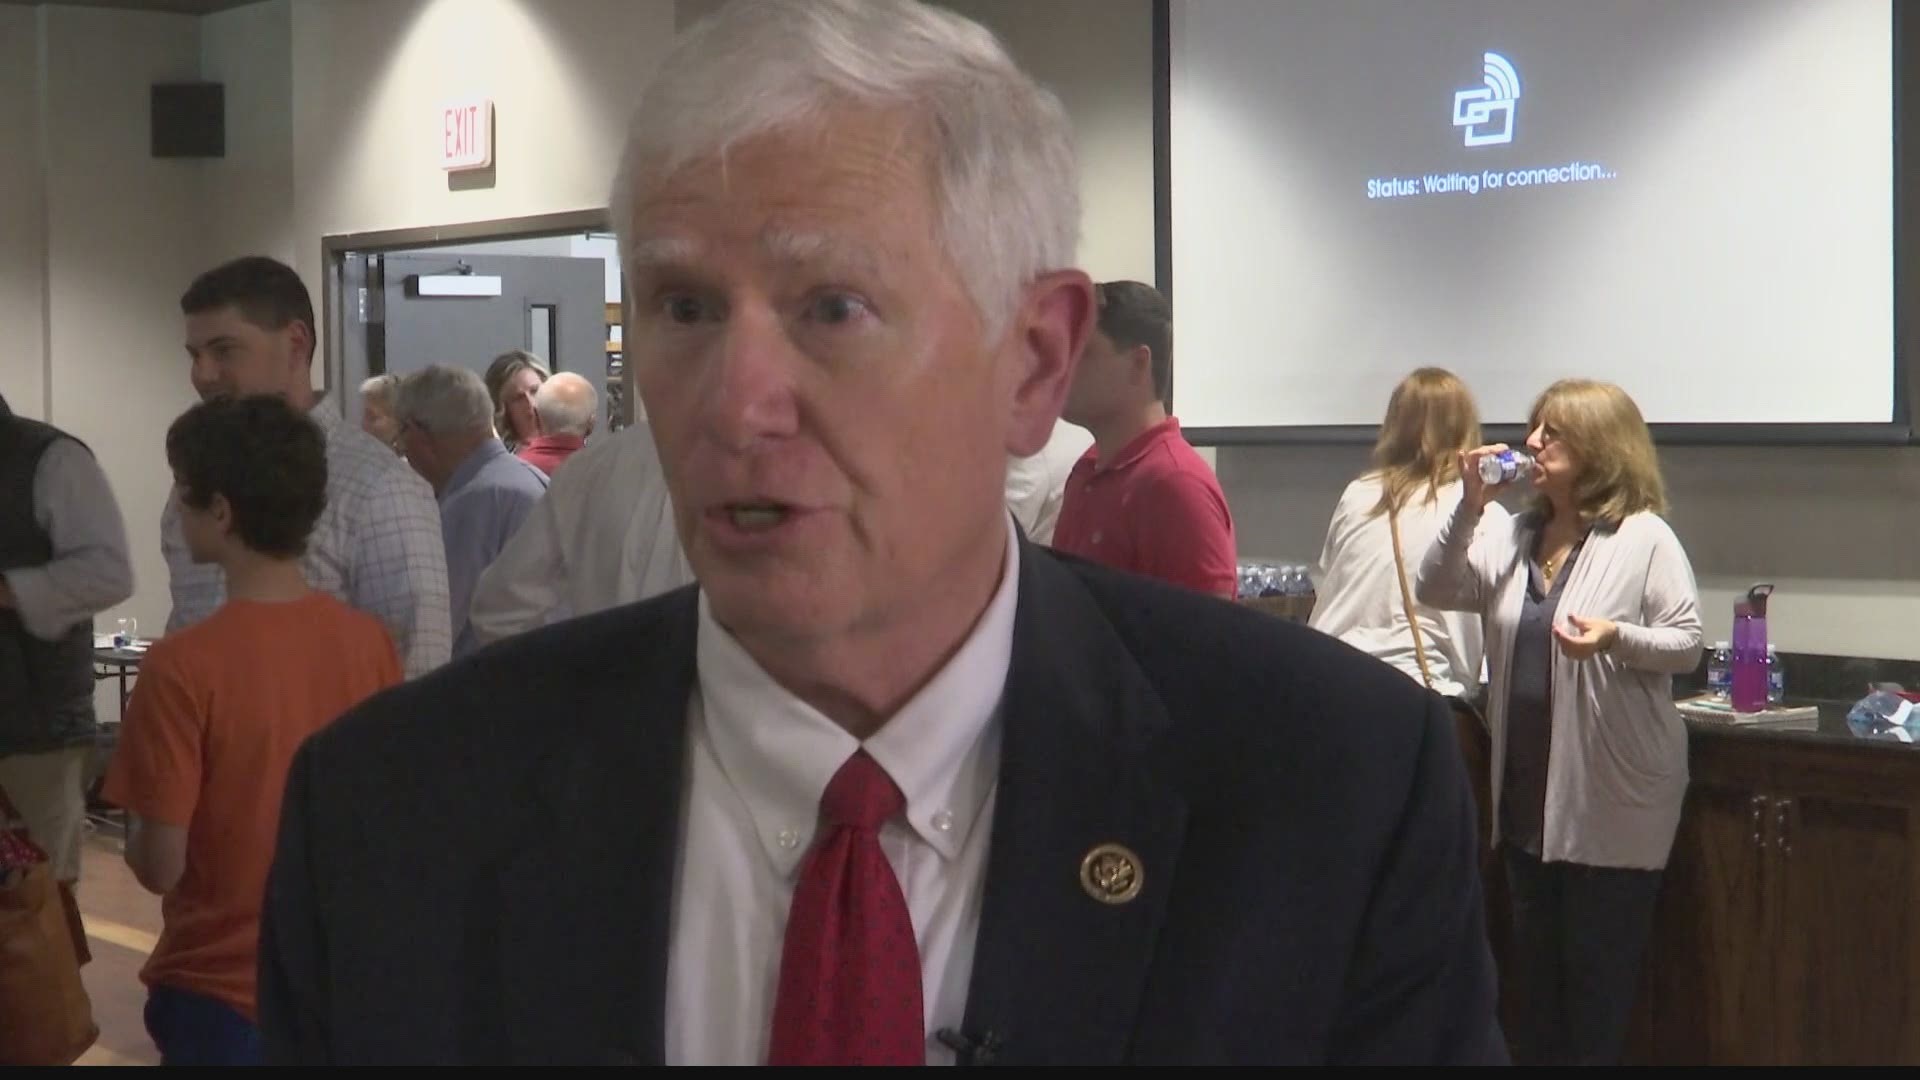 Republican U.S. Representative Congressman Mo Brooks announced his candidacy for the U.S. Senate seat that will be vacated by Sen. Richard Shelby next year.